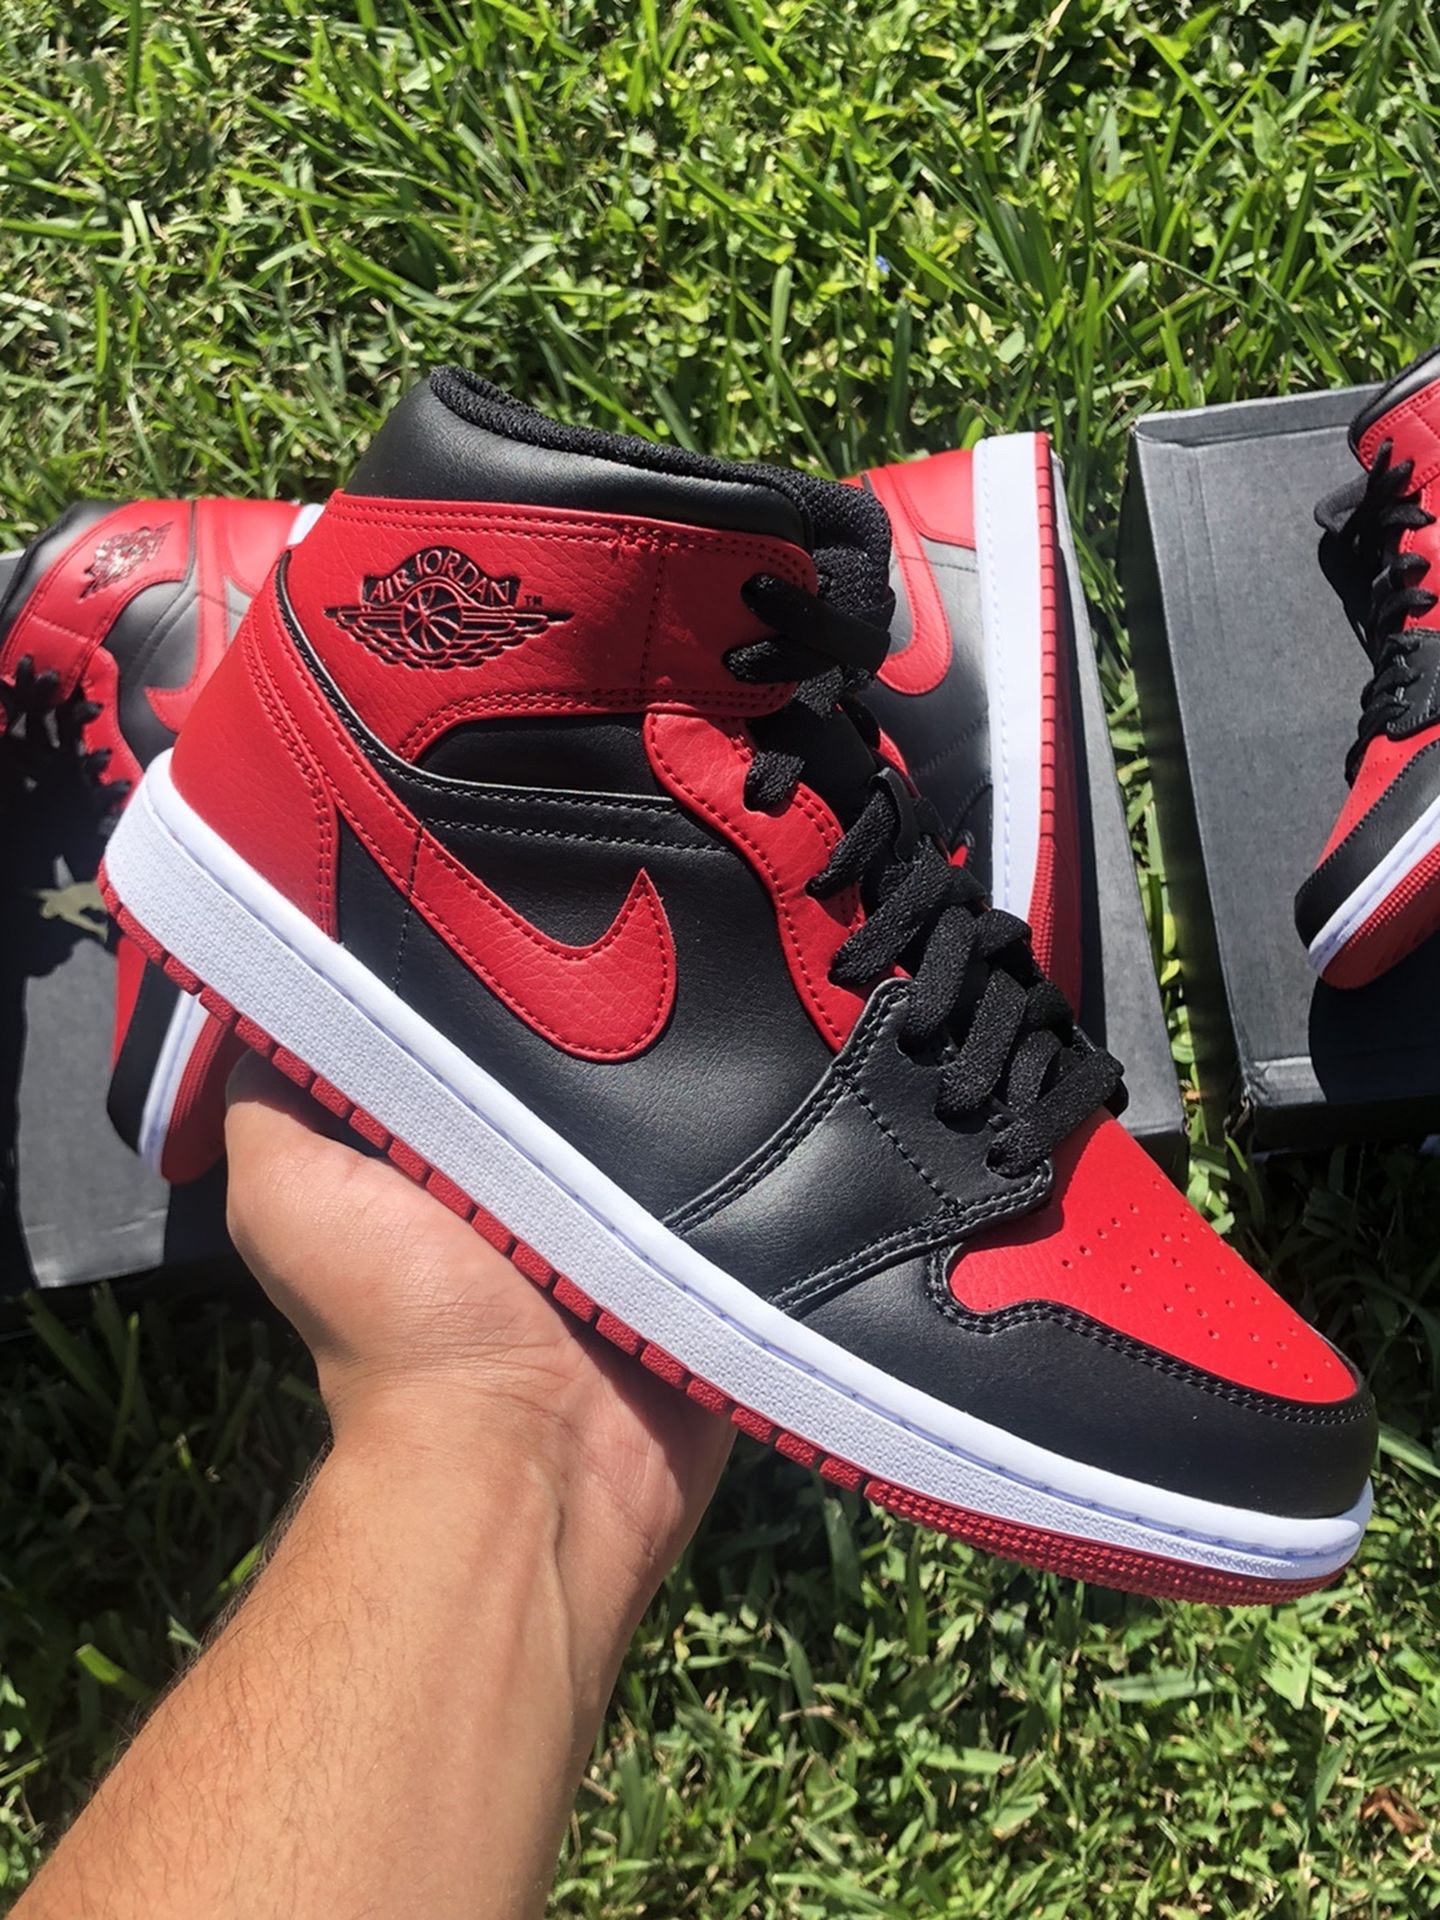 Jordan 1 Mid “Banned” Size 4.5 And 7